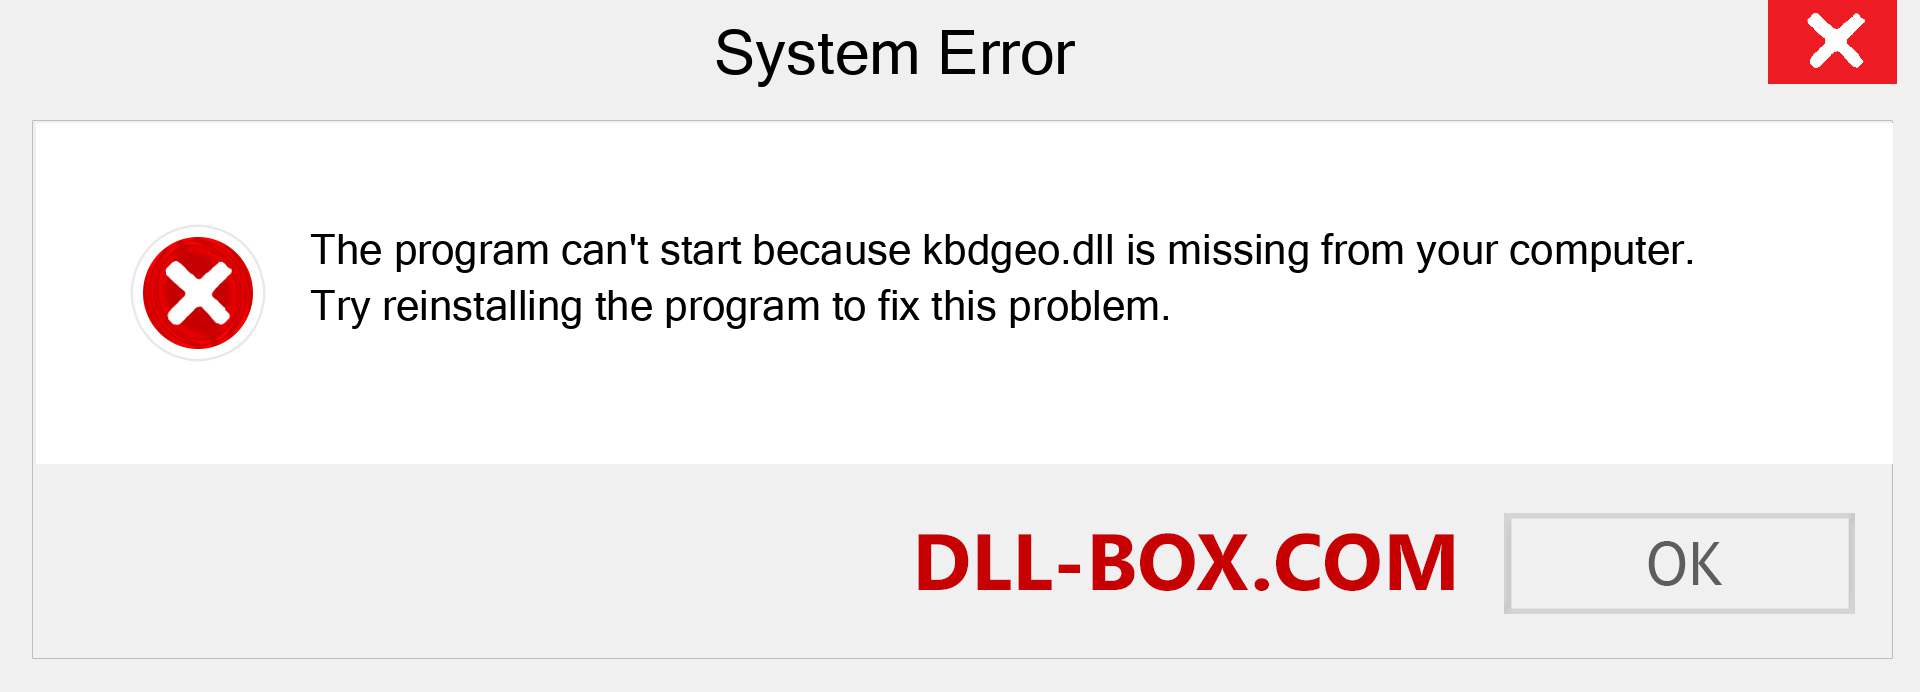  kbdgeo.dll file is missing?. Download for Windows 7, 8, 10 - Fix  kbdgeo dll Missing Error on Windows, photos, images